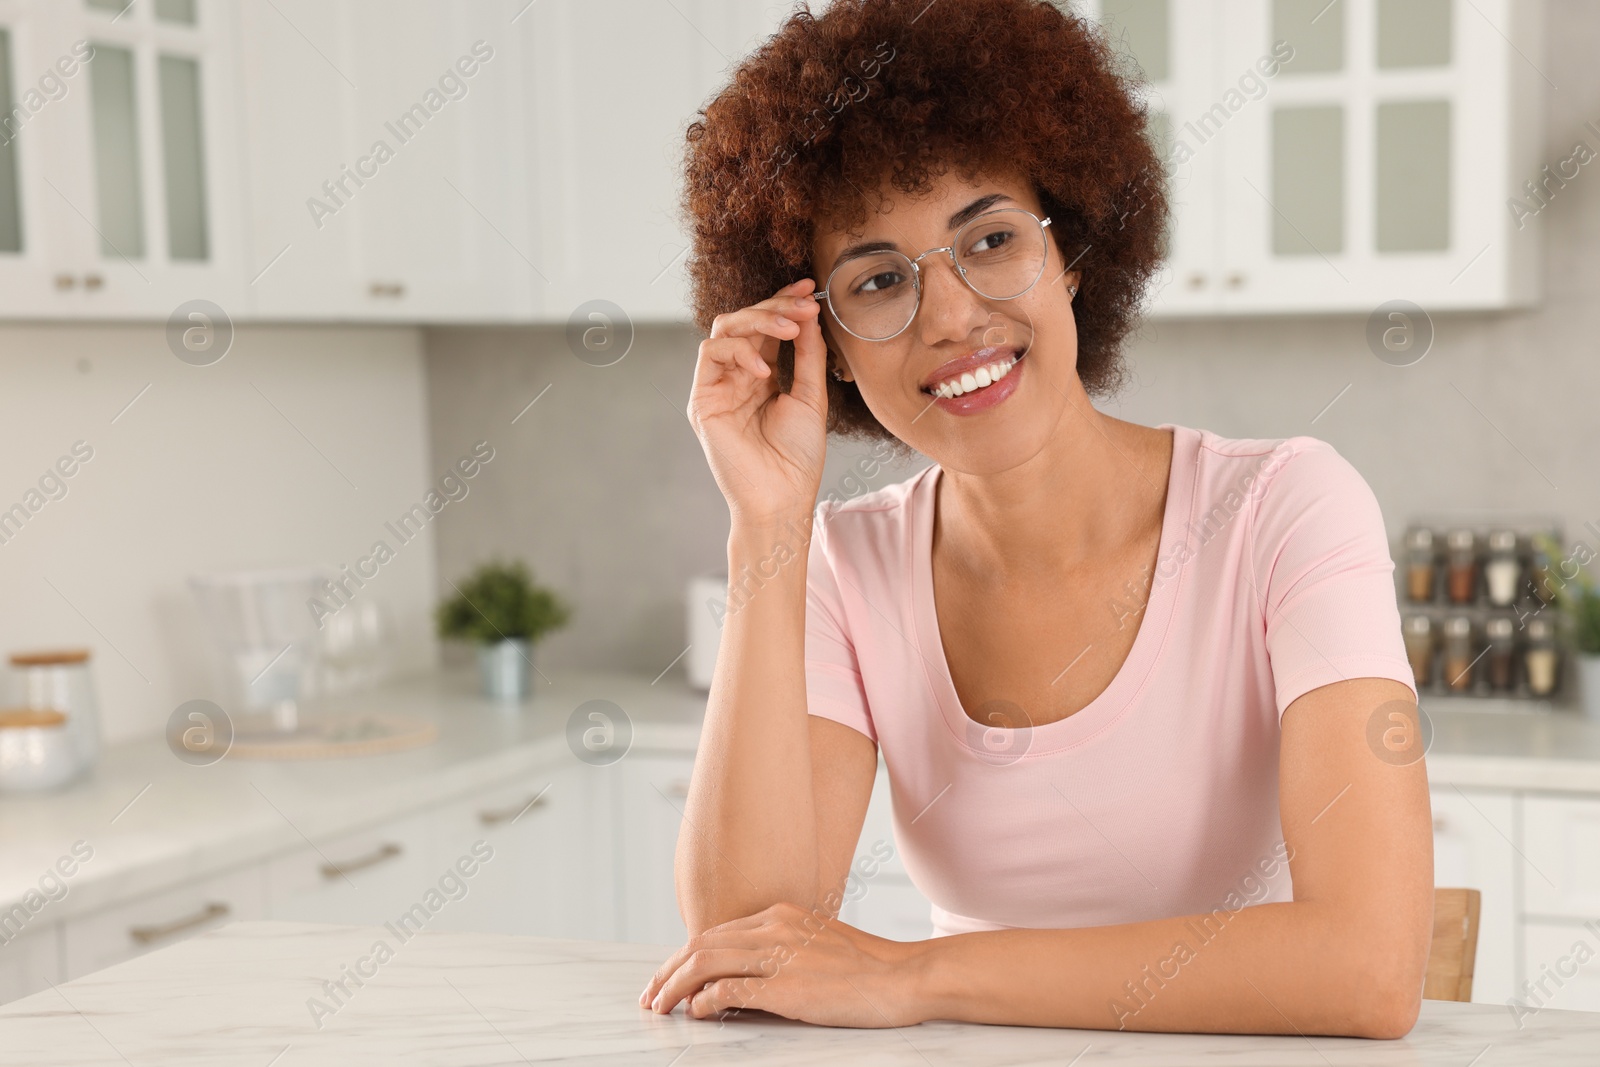 Photo of Happy young woman with eyeglasses at table in kitchen. Space for text